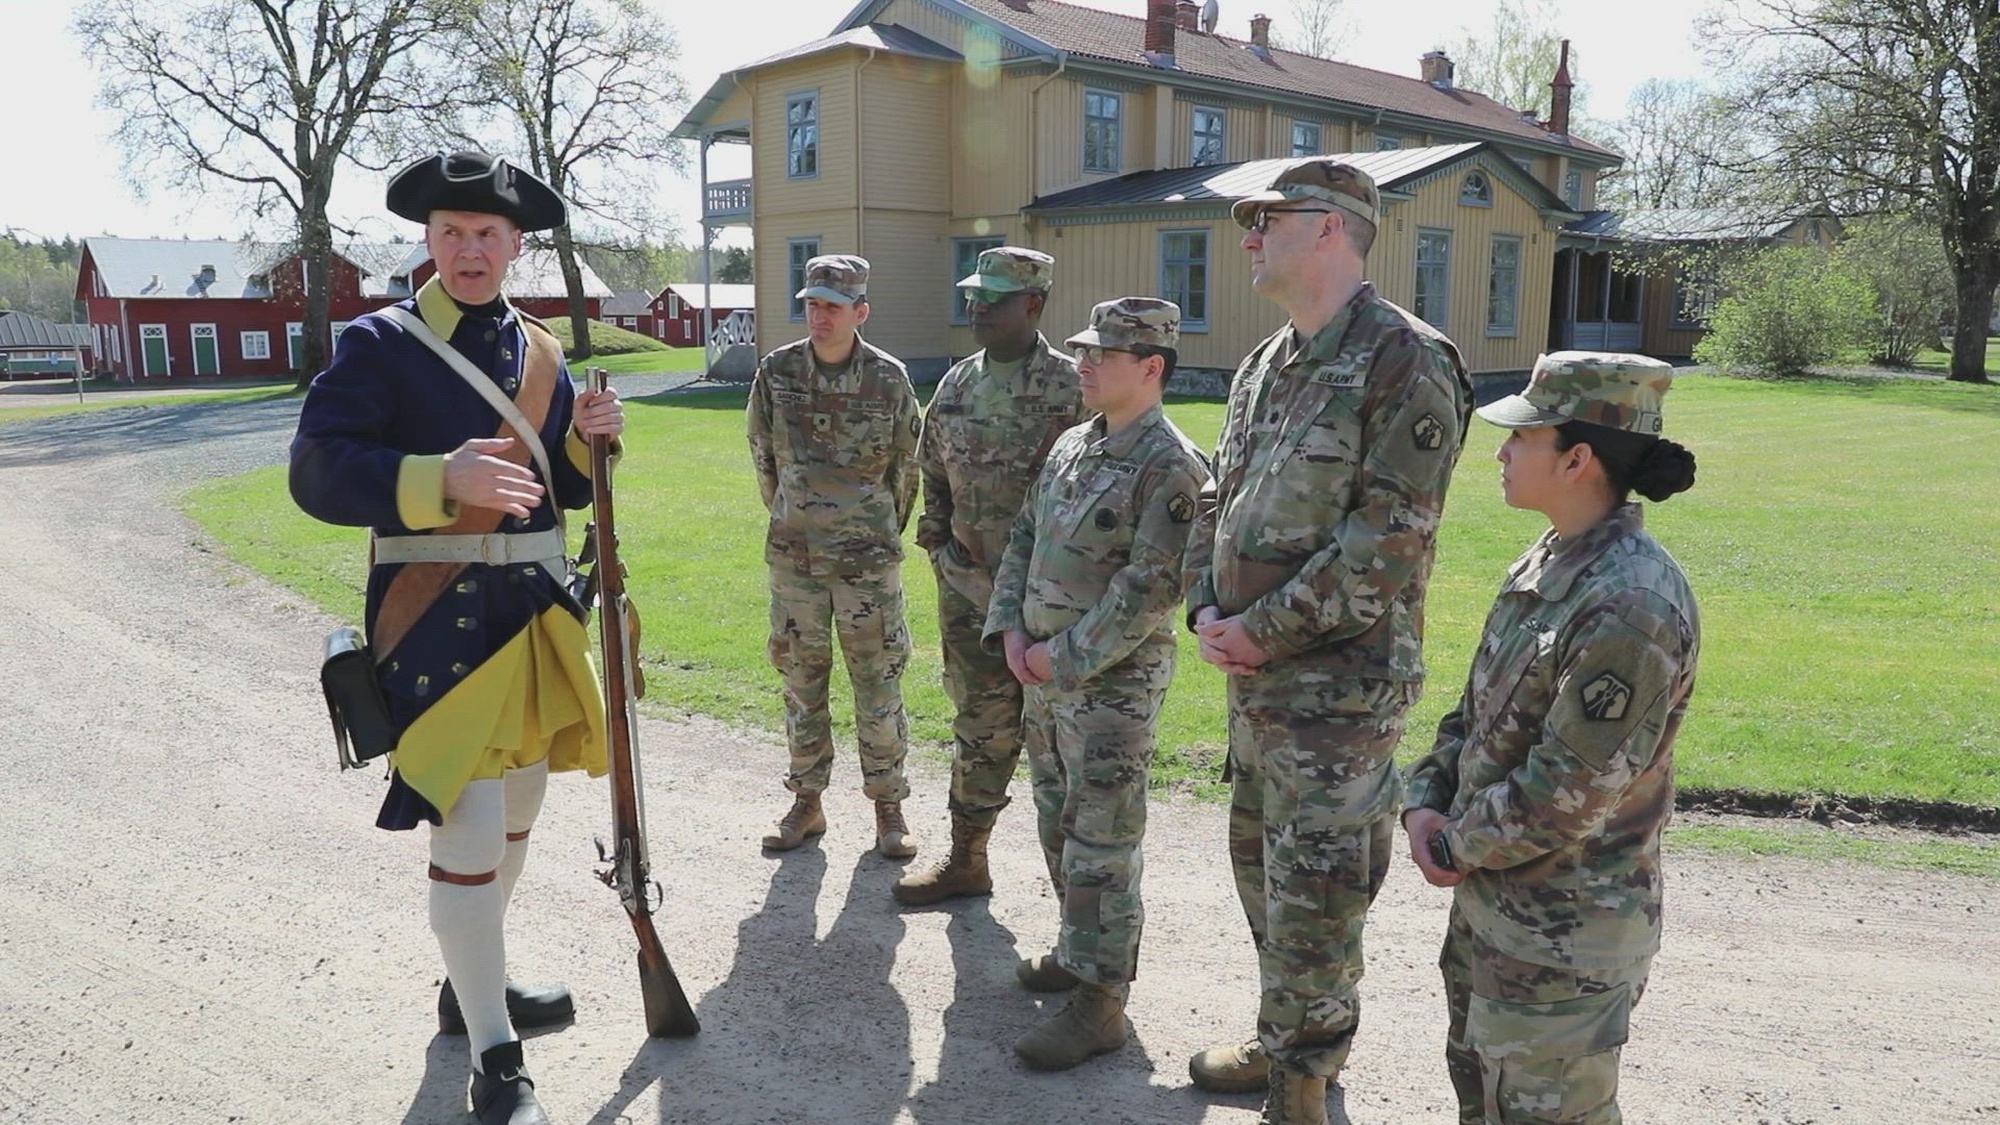 SKILLINGARYD, Sweden – U.S. Army Reserve Soldiers from the 510th Regional Support Group (RSG) learn about Swedish military history during a guided camp tour during Defender Europe on May 3, 2024, in Skillingaryd, Sweden. 

DEFENDER 24 – Dynamic Employment of Forces to Europe for NATO Deterrence and Enhanced Readiness – is the largest U. S. Army exercise in Europe. DEFENDER is the compilation of exercises Saber Strike, Immediate Response, and Swift Response, and aims to deter adversaries, transform operational mission command, build readiness, and strengthen the NATO Alliance. More than 17,000 U.S. and 23,000 multi-national service members from more than 20 Allied and partner nations cooperate for the success of this mission. 

The 7th Mission Support Command, America’s Army Reserve in Europe, provides ready, capable units of action, to support U.S. Army Europe – Africa missions across the globe. Soldiers from 510th RSG provide Base Operational Support and Integration (BOS-I), in Skillingaryd, Sweden for the U.S. designated zones on the host-nation base, to enable the reception, staging and integration of exercise participant units and equipment on that base. For more stories and information on the 7th Mission Support Command, connect on Facebook @7thmsc. (U.S. Army Reserve video by Capt. David A. Jackson)